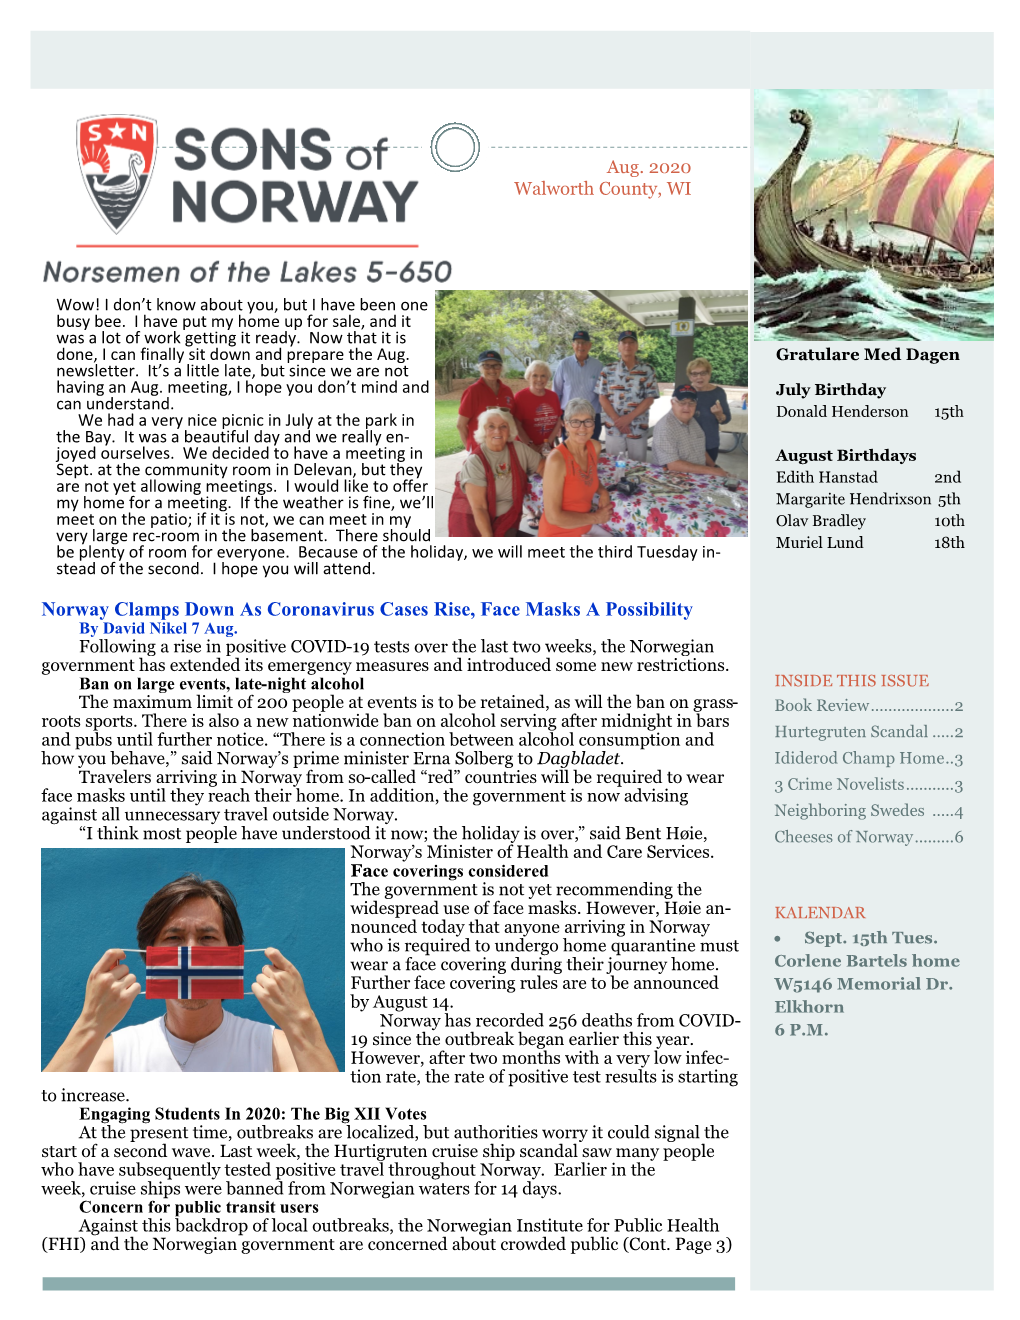 Norway Clamps Down As Coronavirus Cases Rise, Face Masks a Possibility by David Nikel 7 Aug